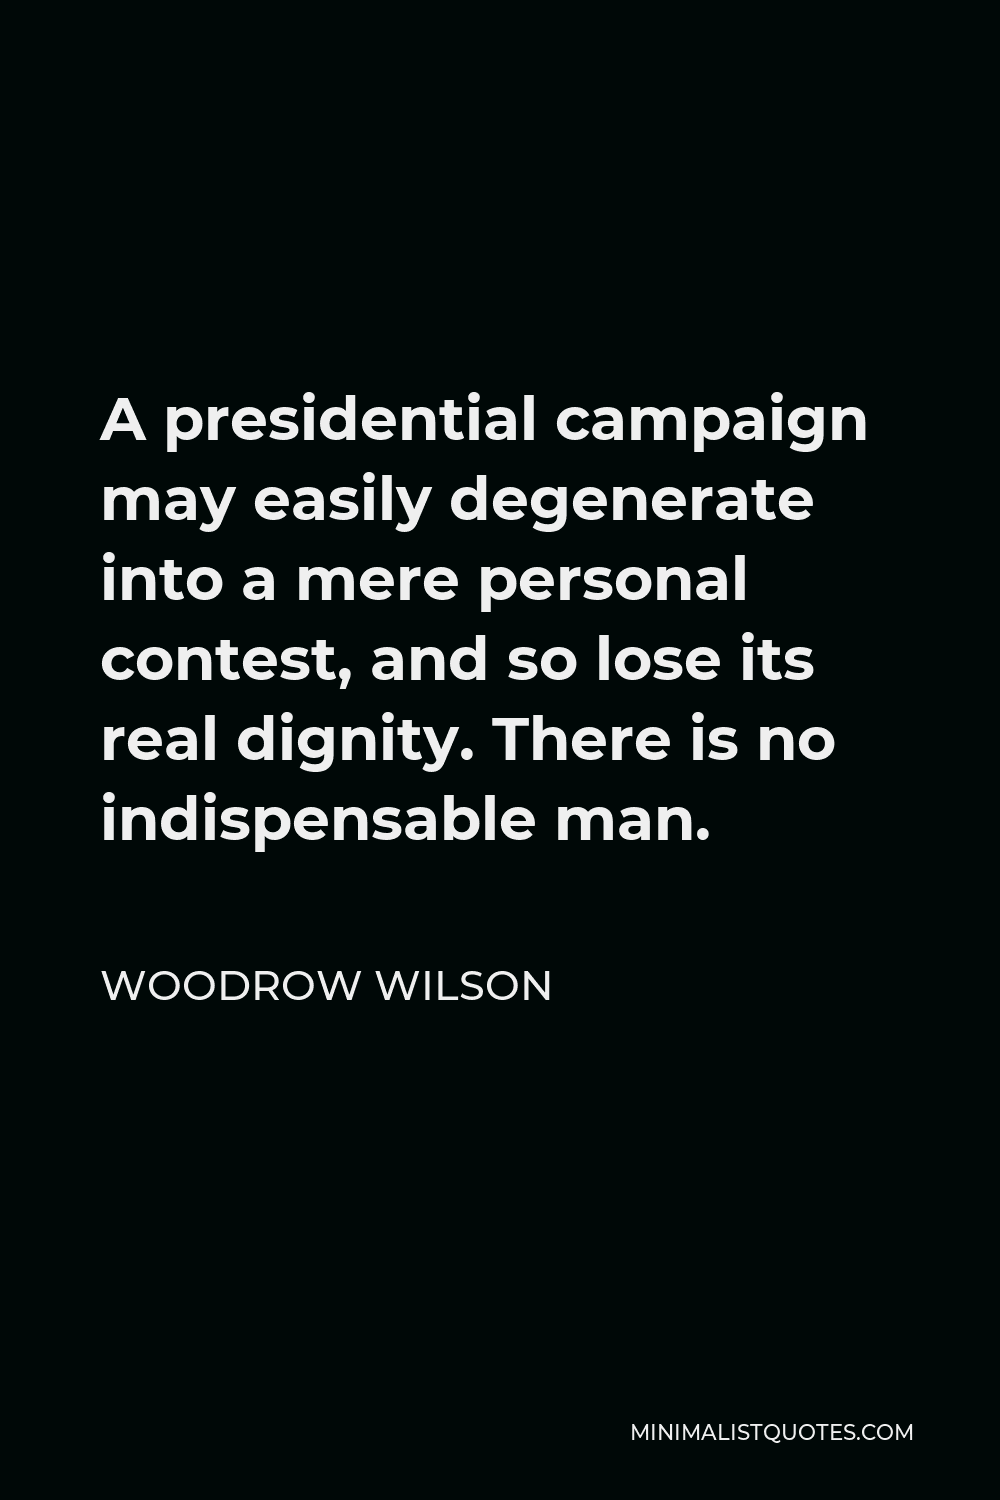 Woodrow Wilson Quote - A presidential campaign may easily degenerate into a mere personal contest, and so lose its real dignity. There is no indispensable man.